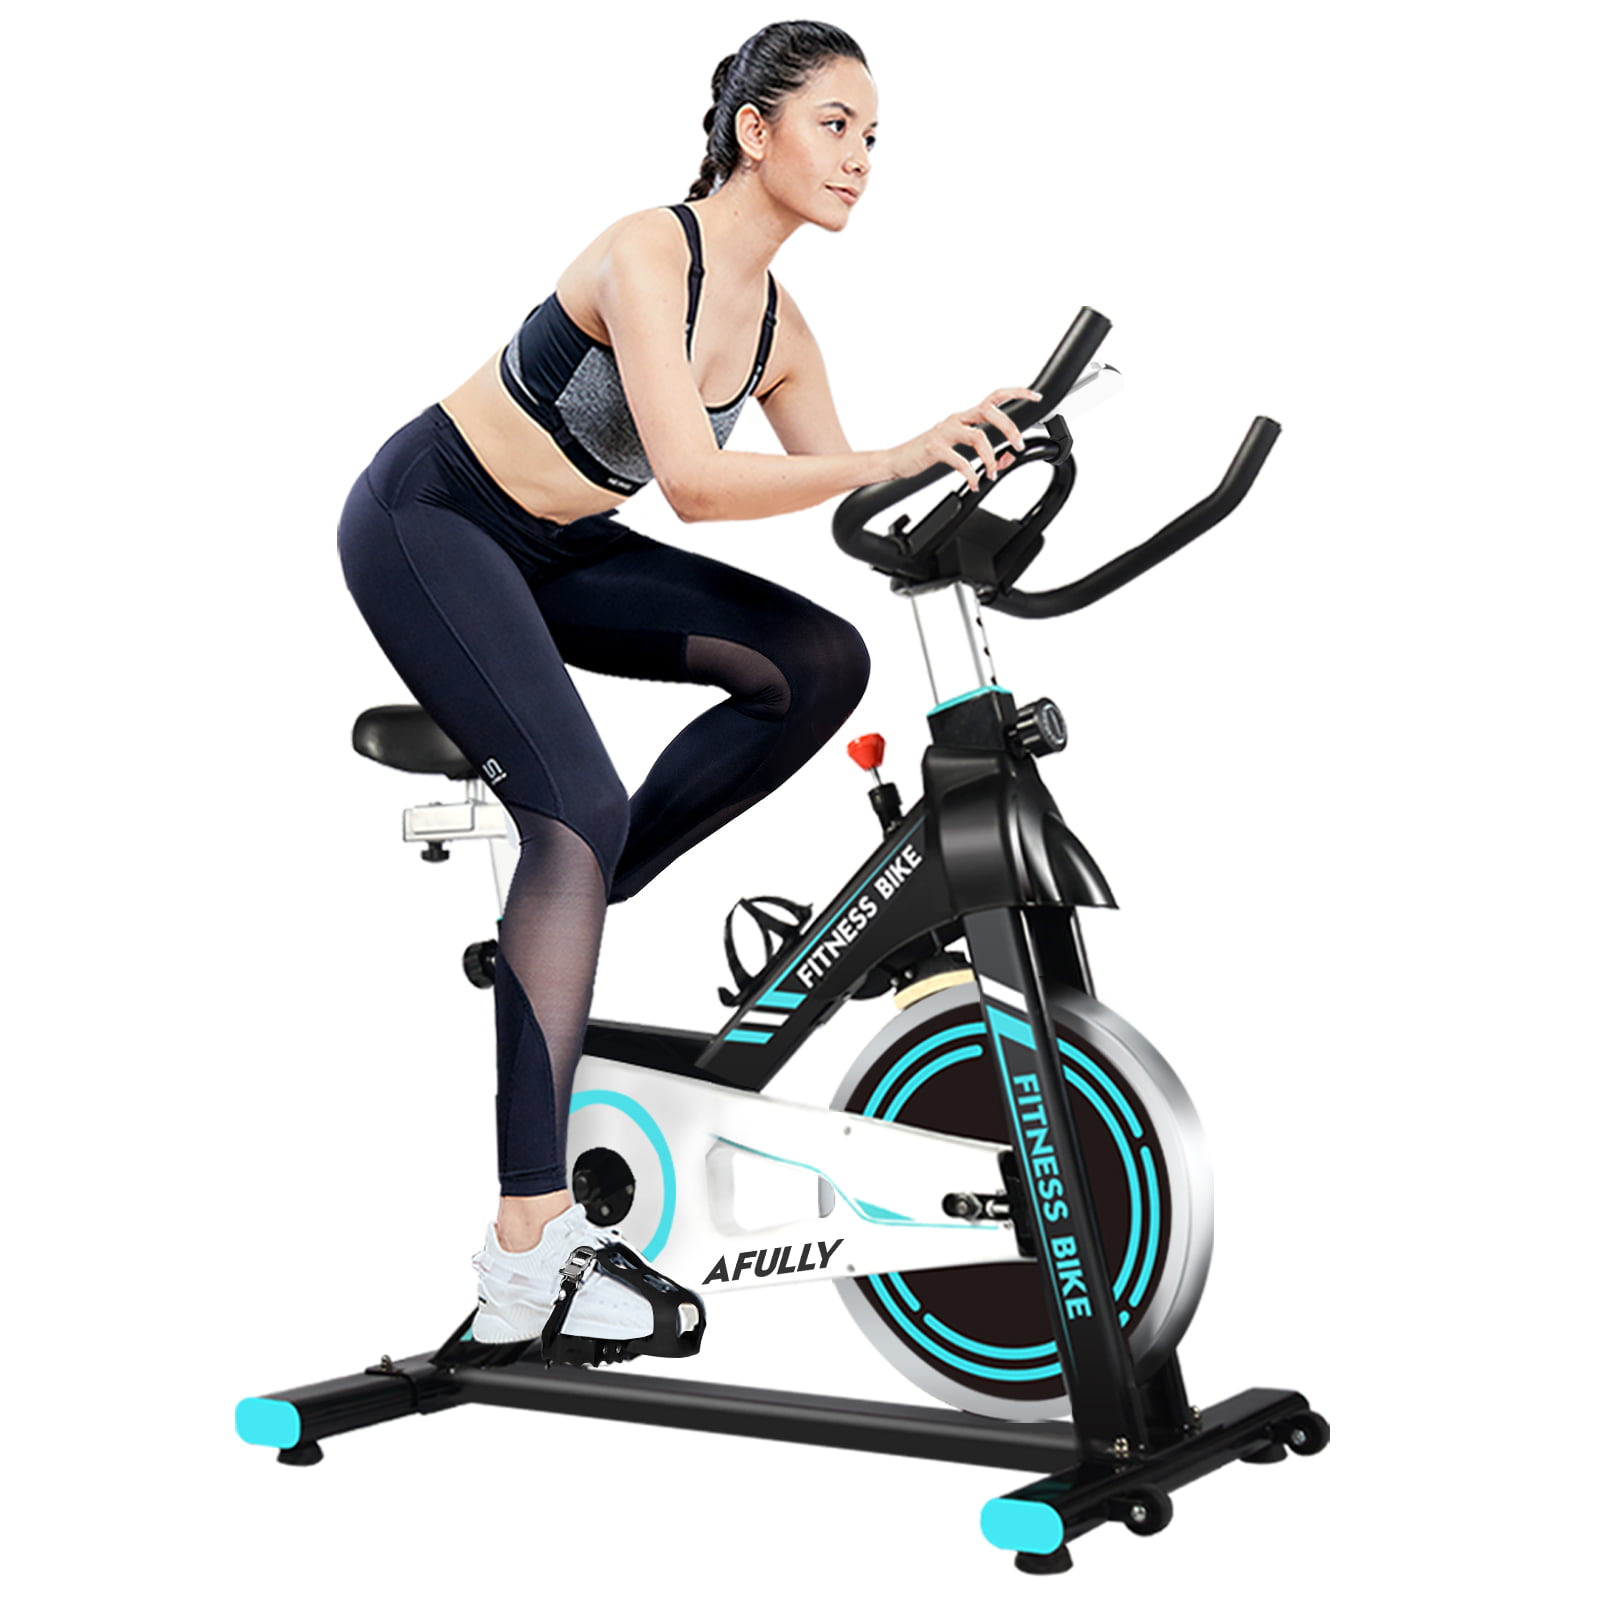 HEKA Exercise Bike Indoor Cycling Bike Stationary for Home Cardio Workout Bike Training Exercise Bike with APP Belt Drive Adjustable Resistance Comfortable Seat Cushion 